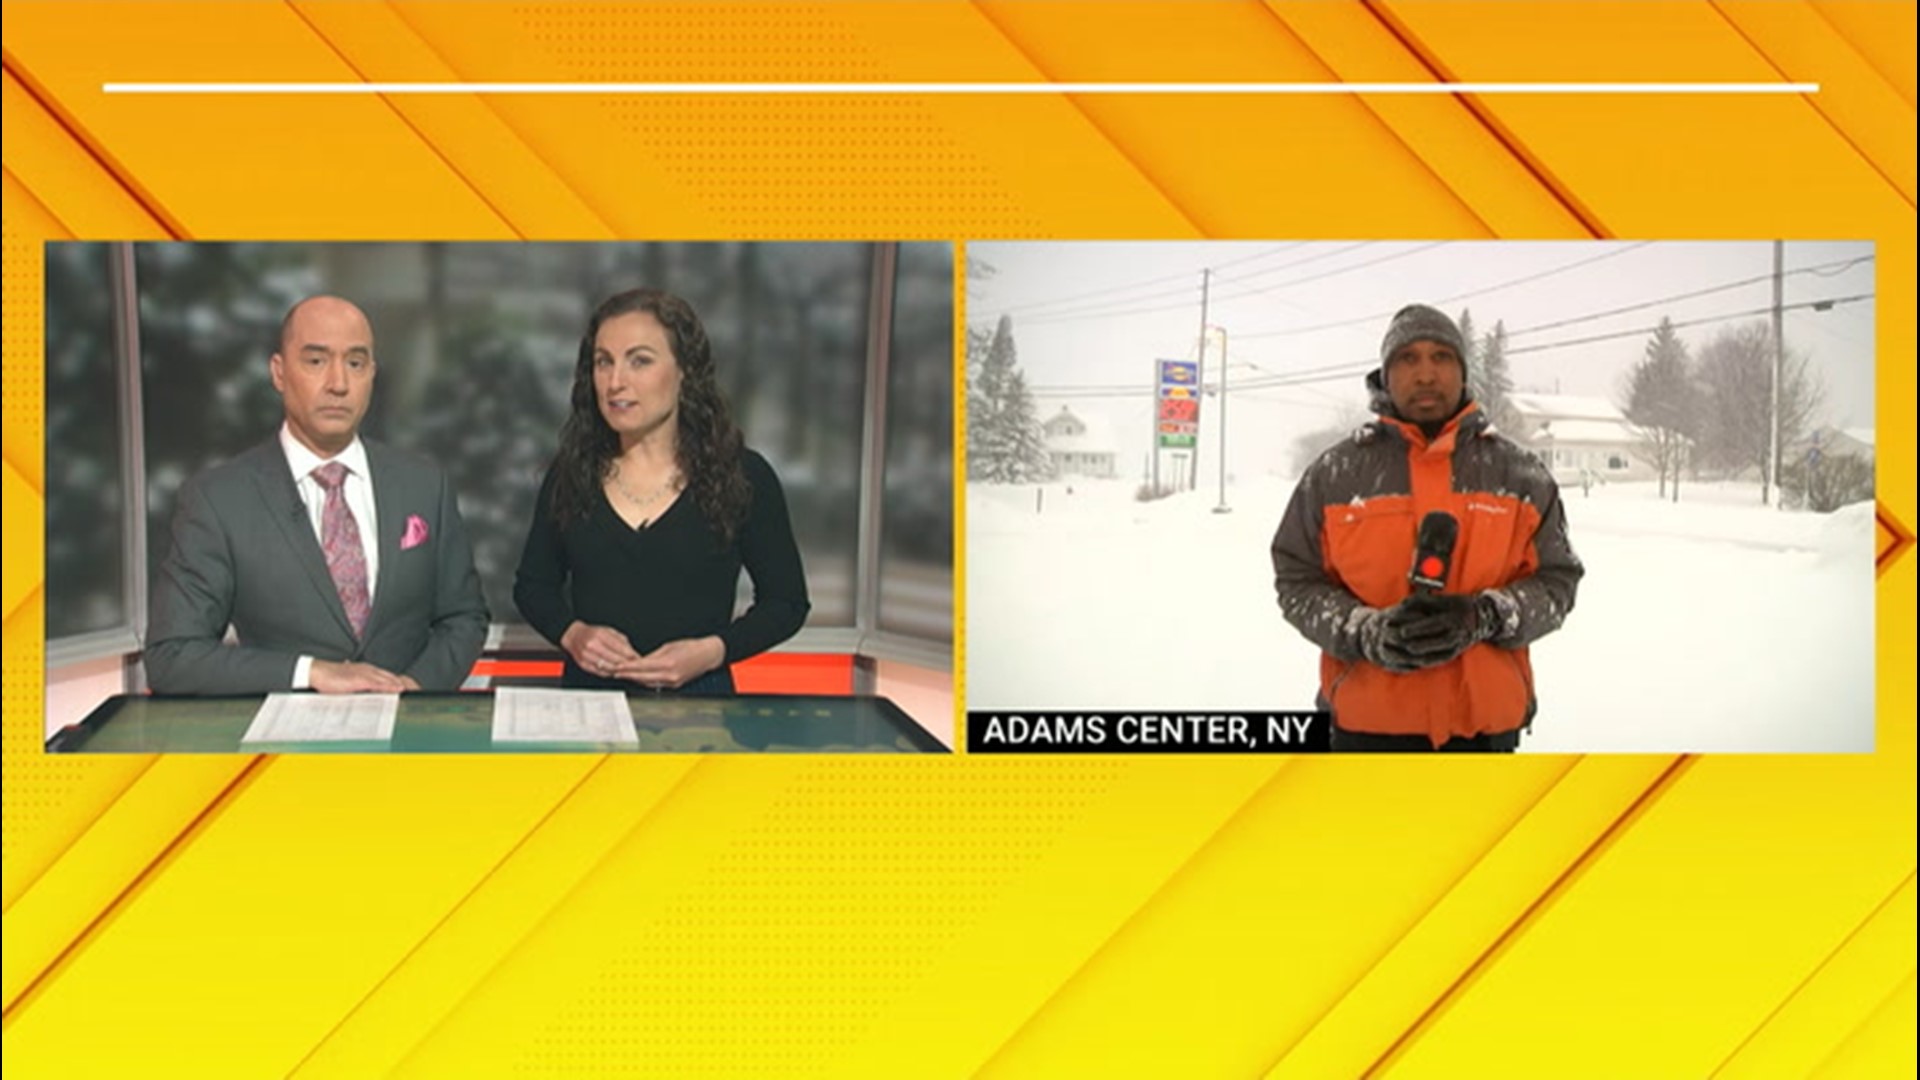 Treacherous travel conditions continue in upstate New York, with high winds and heavy snow. Dexter Henry reports live from Adams Center, New York.